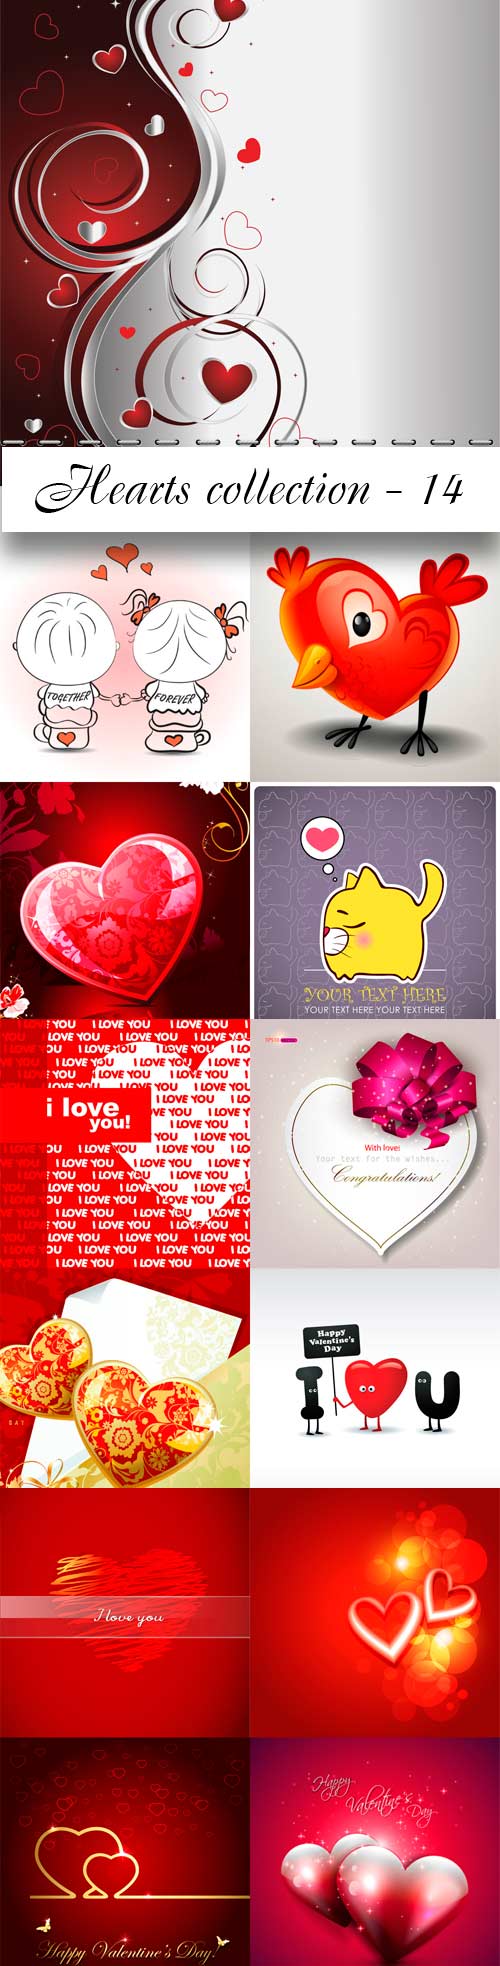 Hearts collection - 14